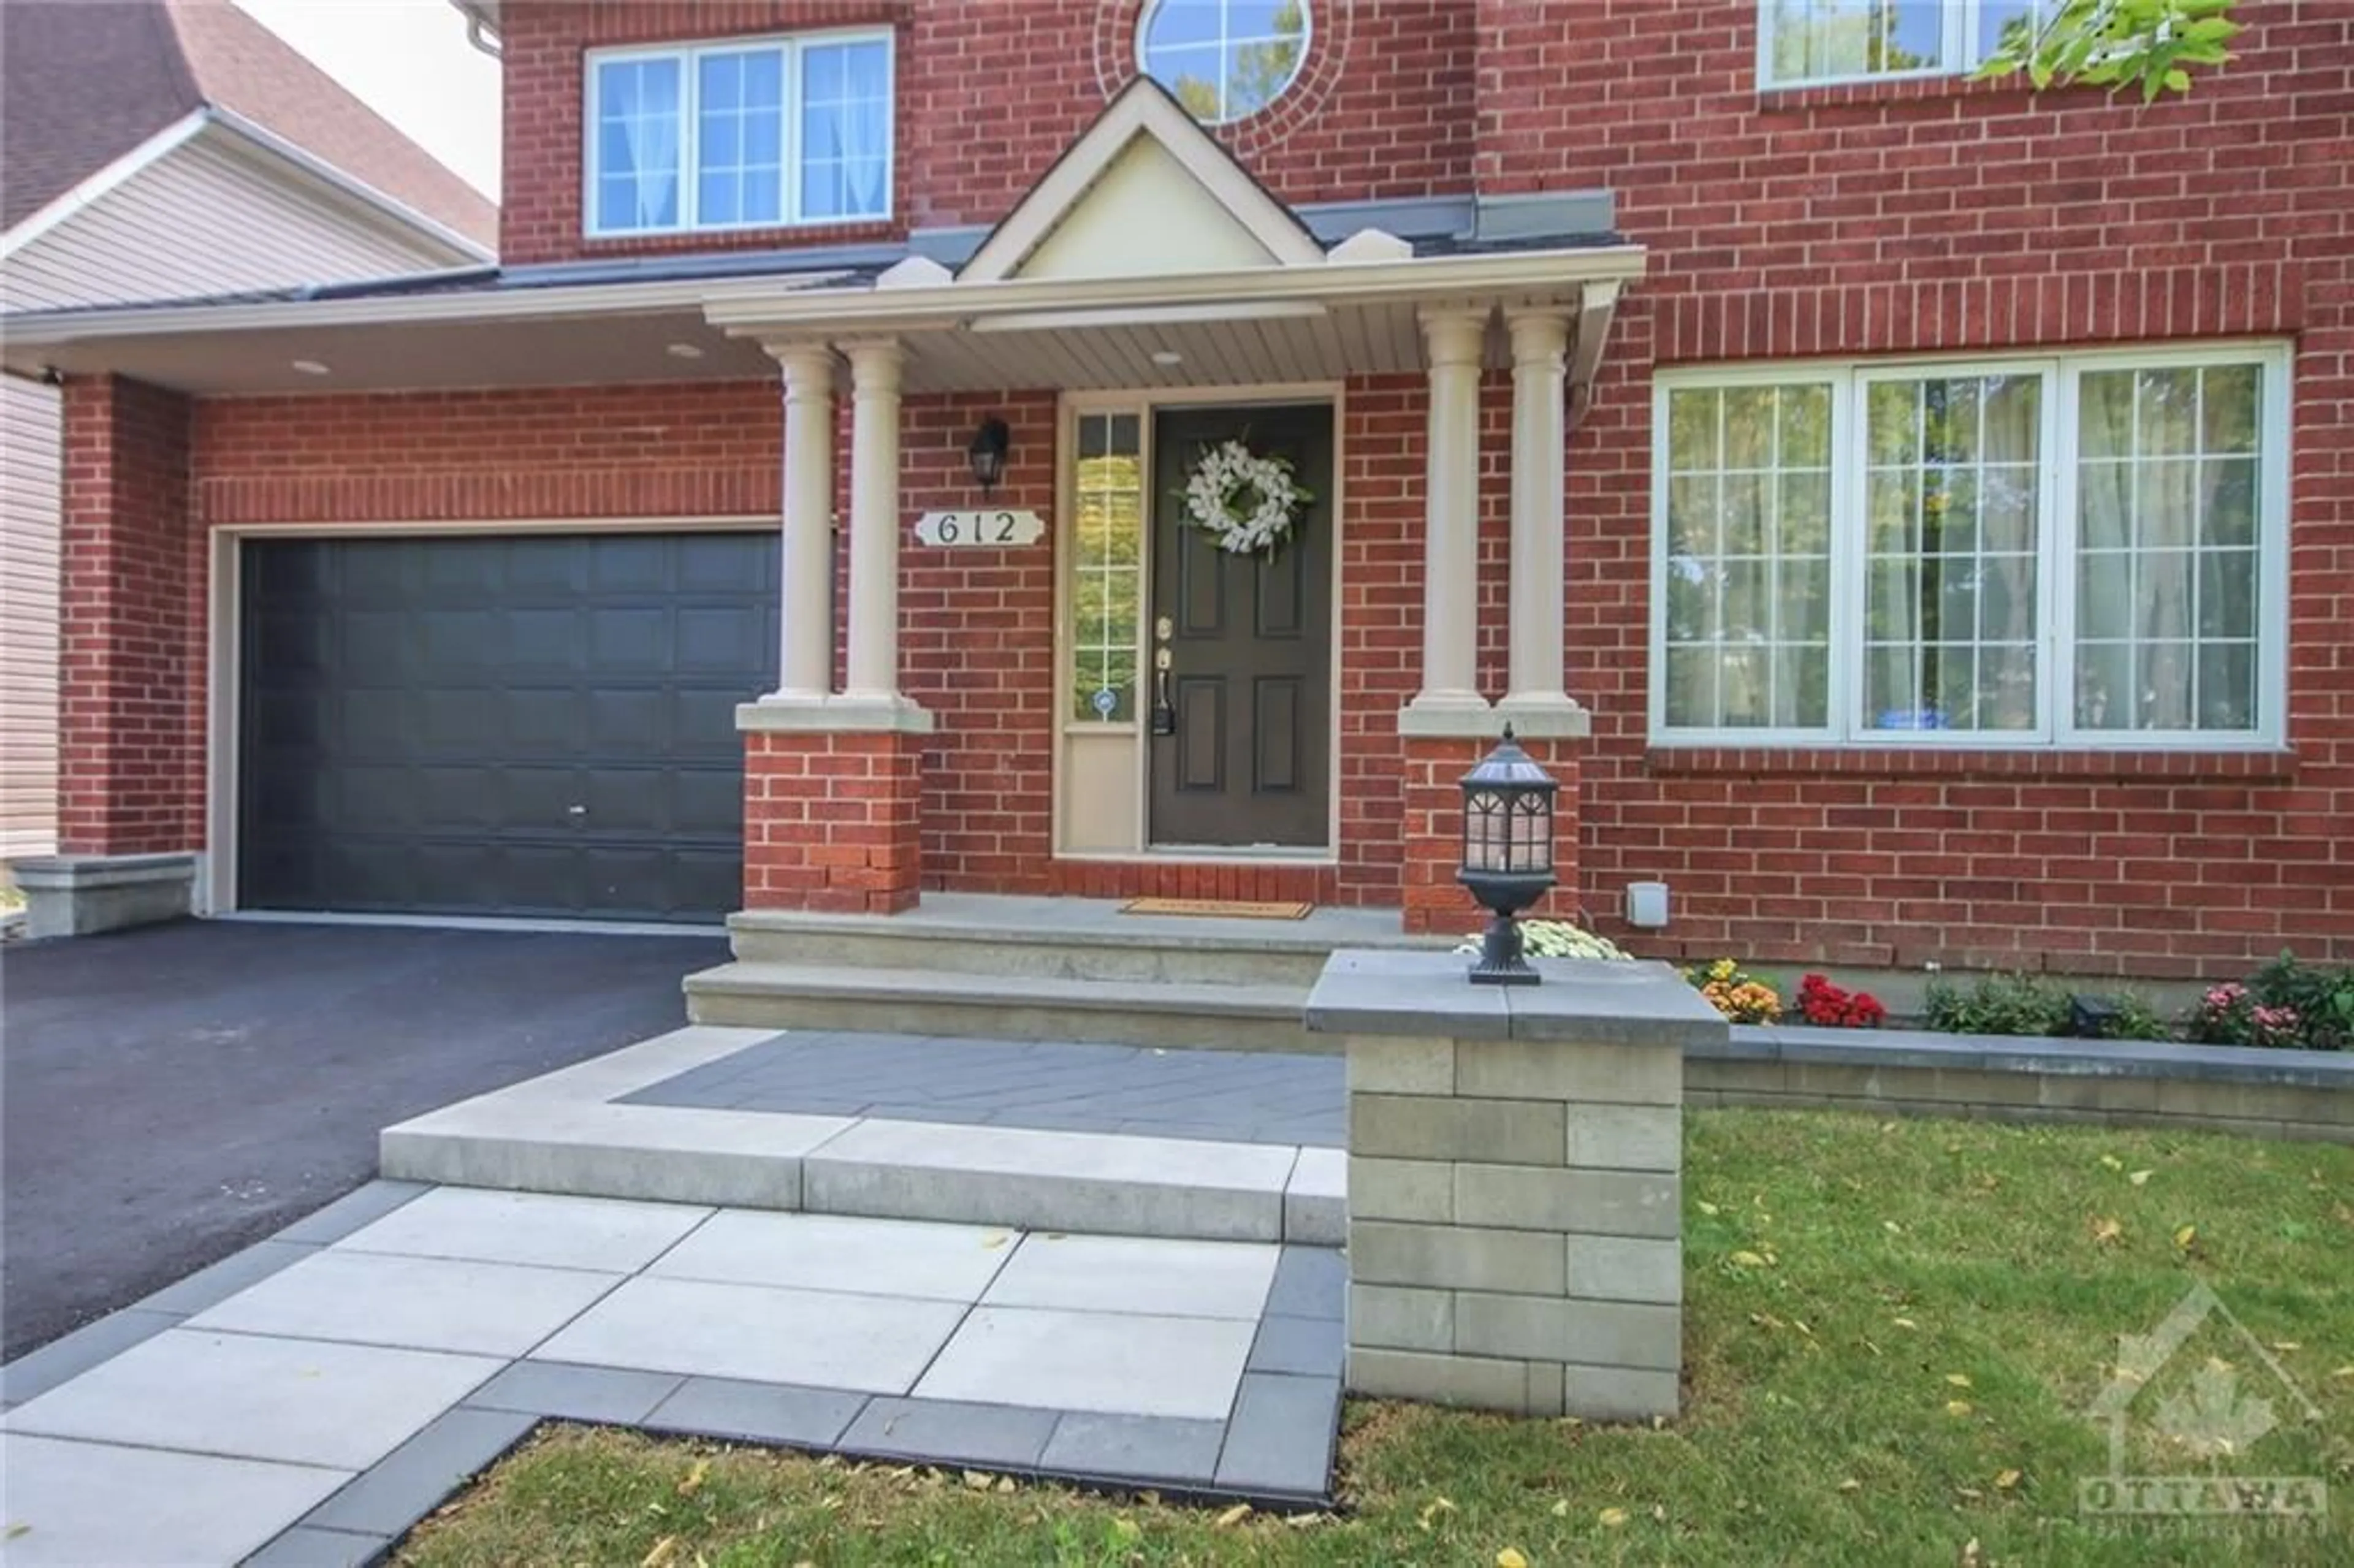 Home with brick exterior material for 612 CHARDONNAY Dr, Ottawa Ontario K4A 4K4